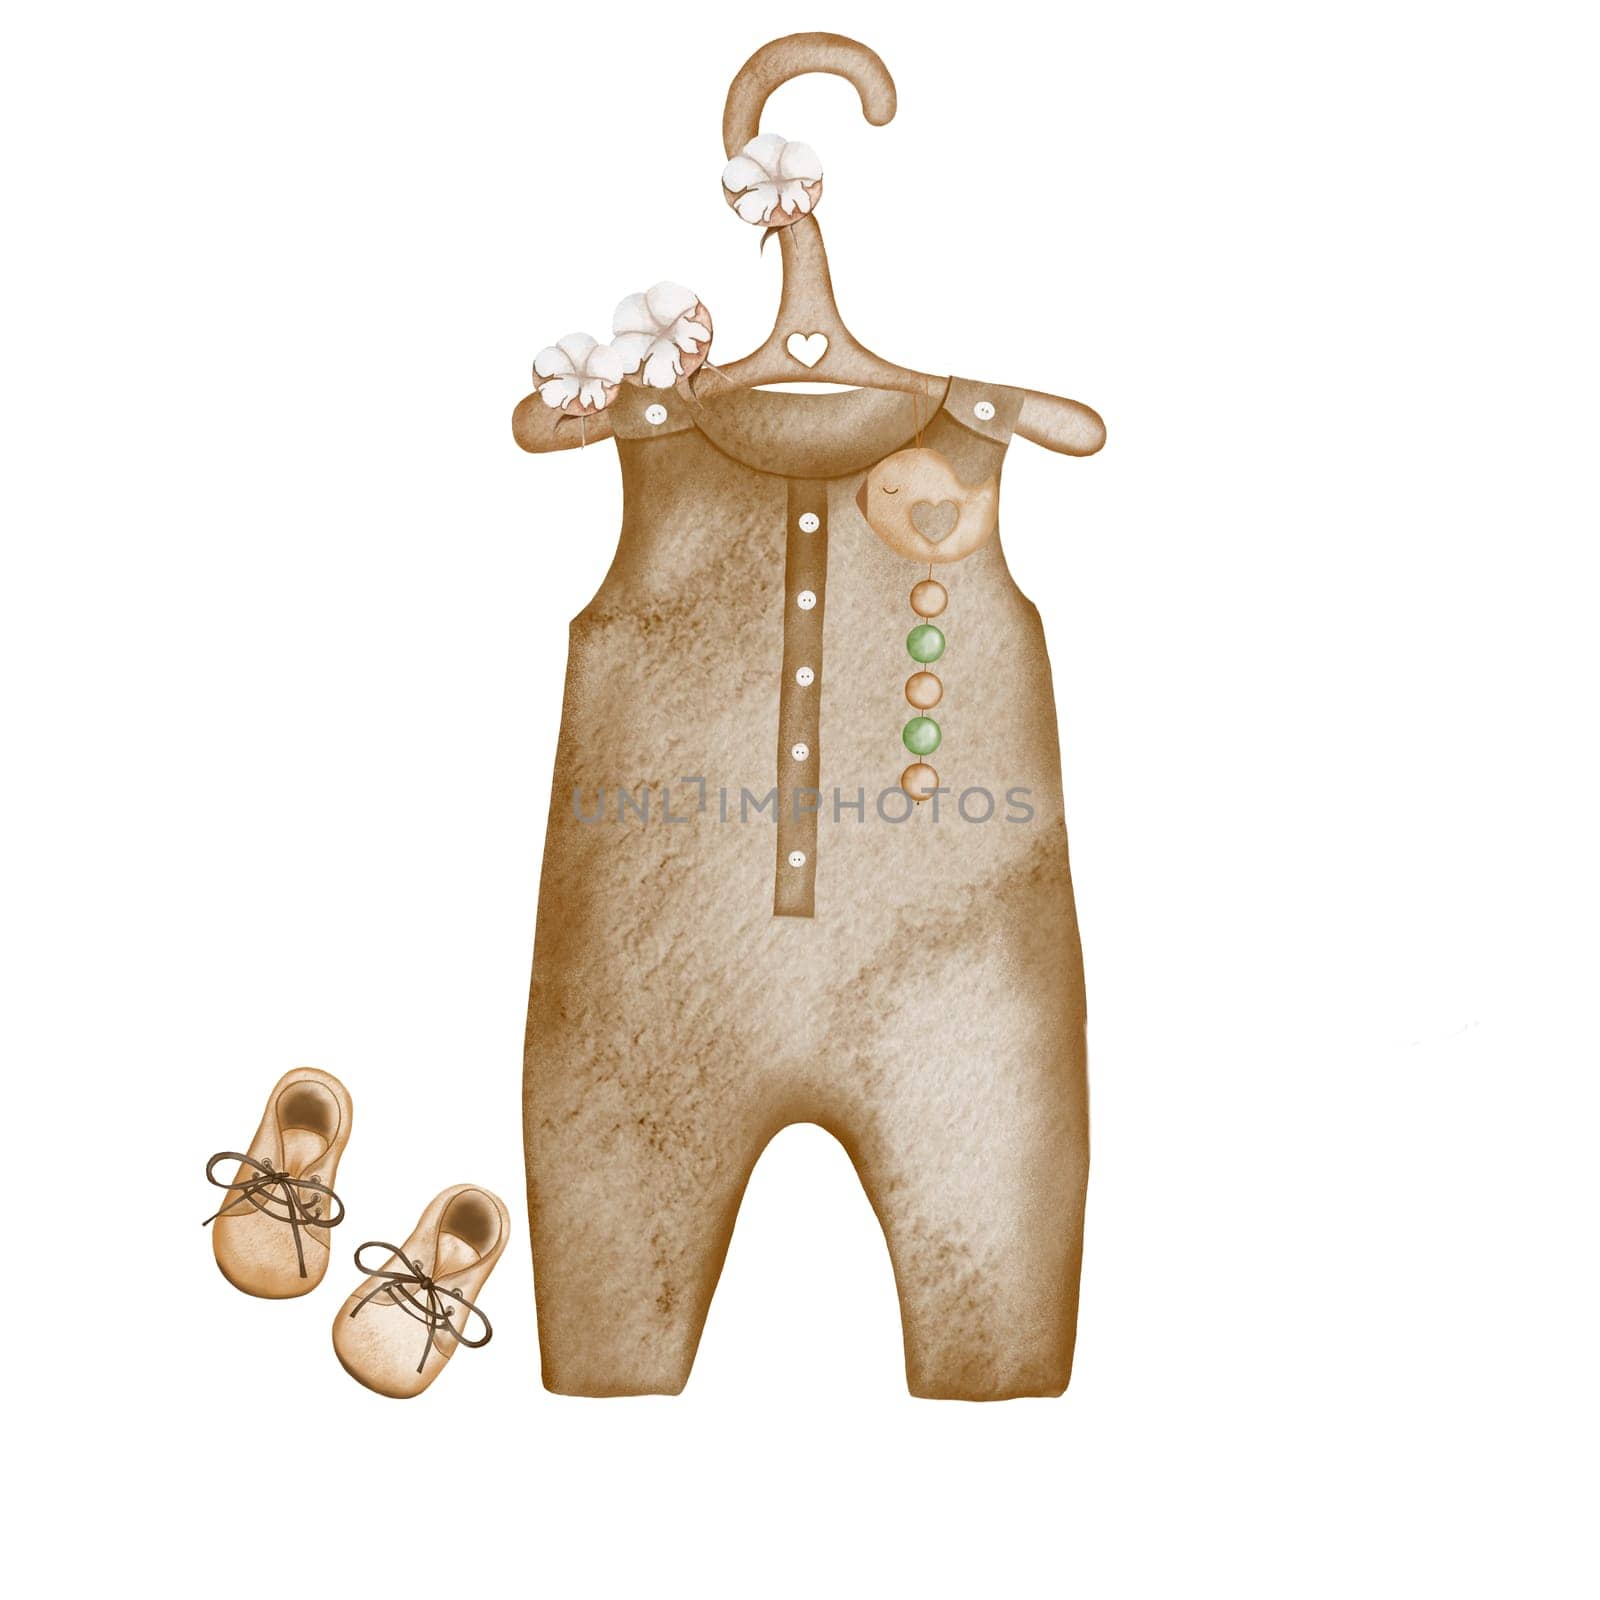 Cute watercolor drawing of newborn baby bodysuit and little shoes, cotton flowers wooden hanger and rattle. Pretty template for baby shower and birth invitations. High quality illustration